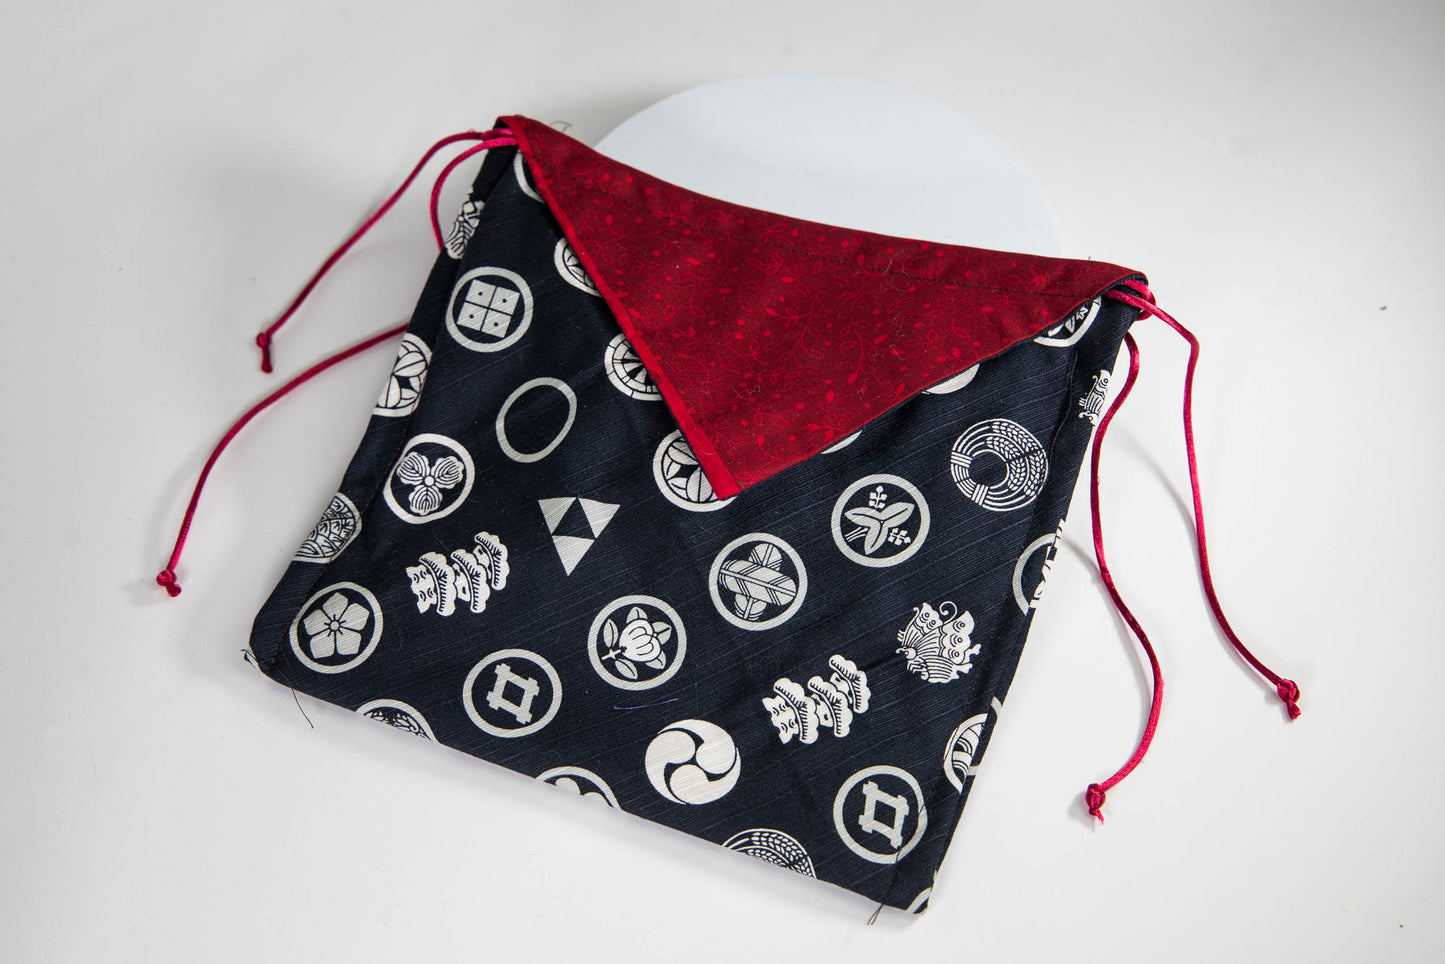 Origami Pouch